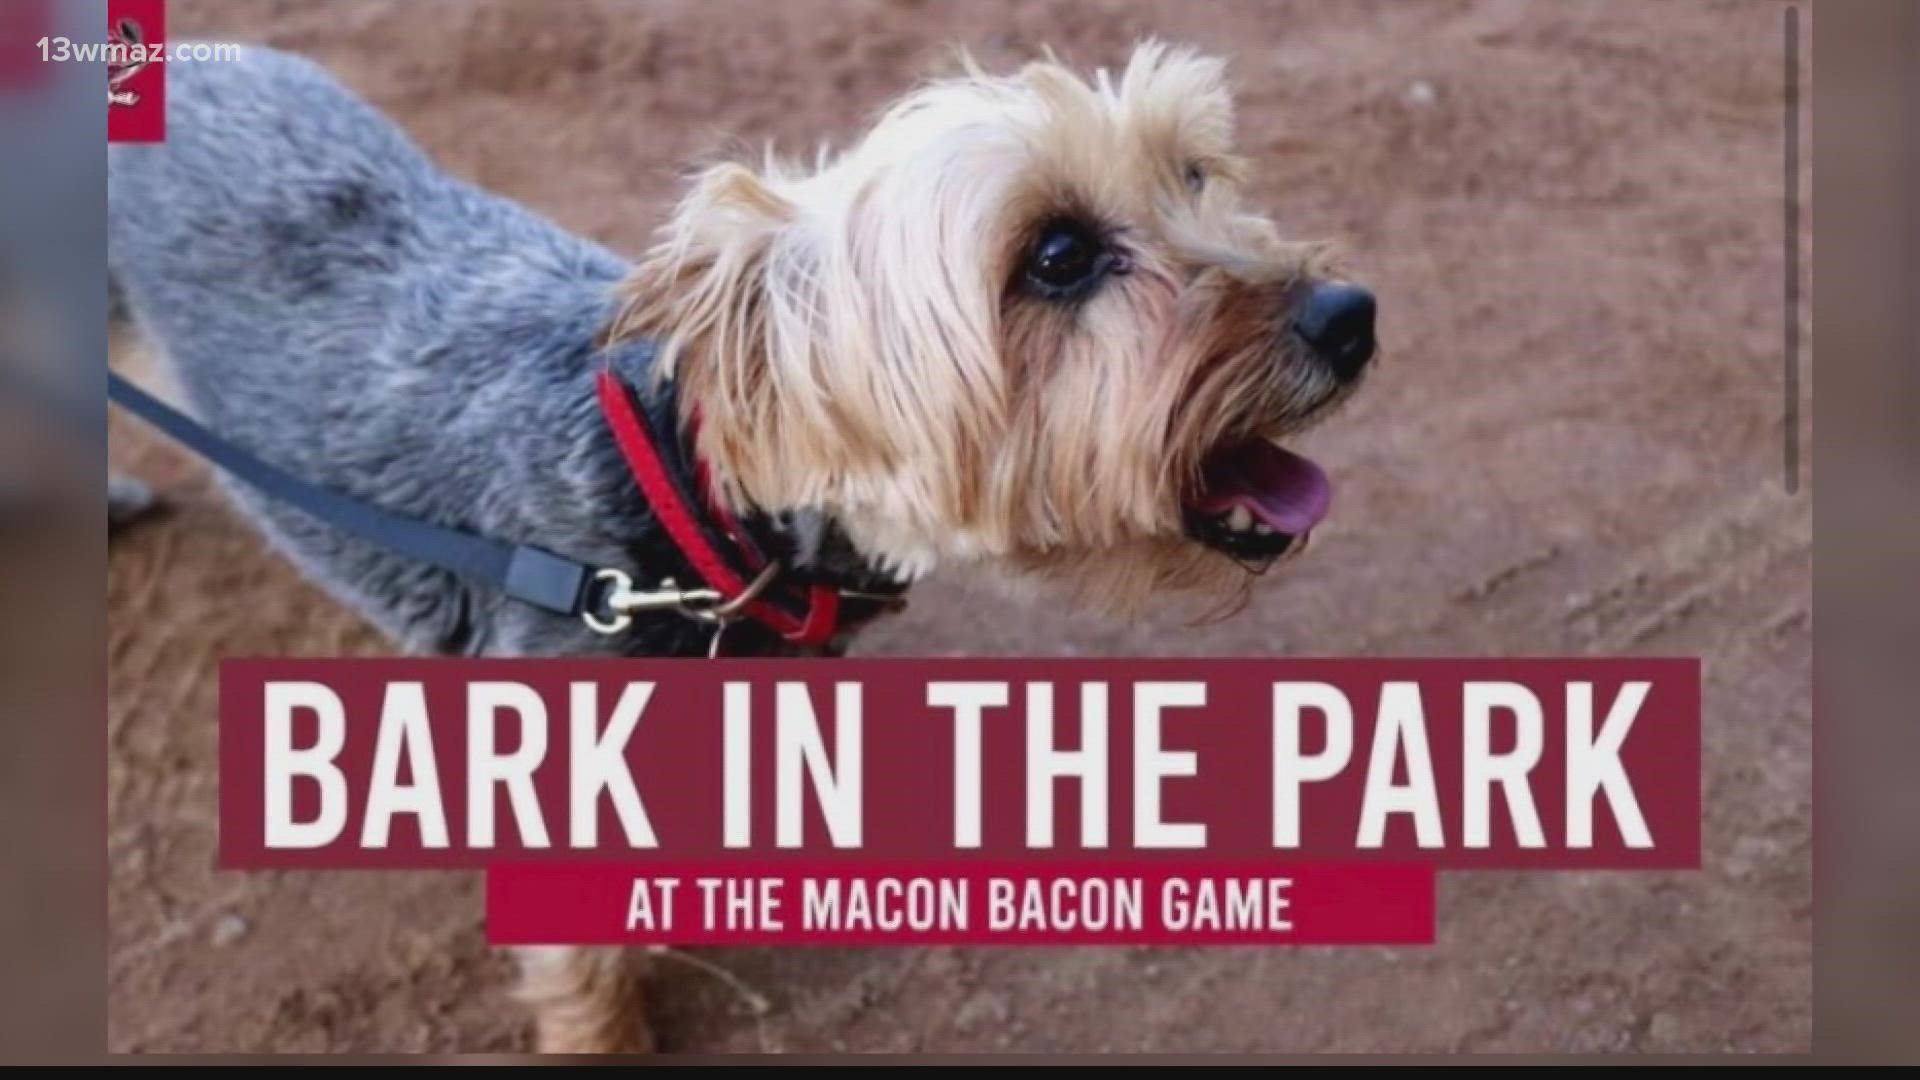 Pups can take part in a pregame parade, costume contest, and run the bases after the game